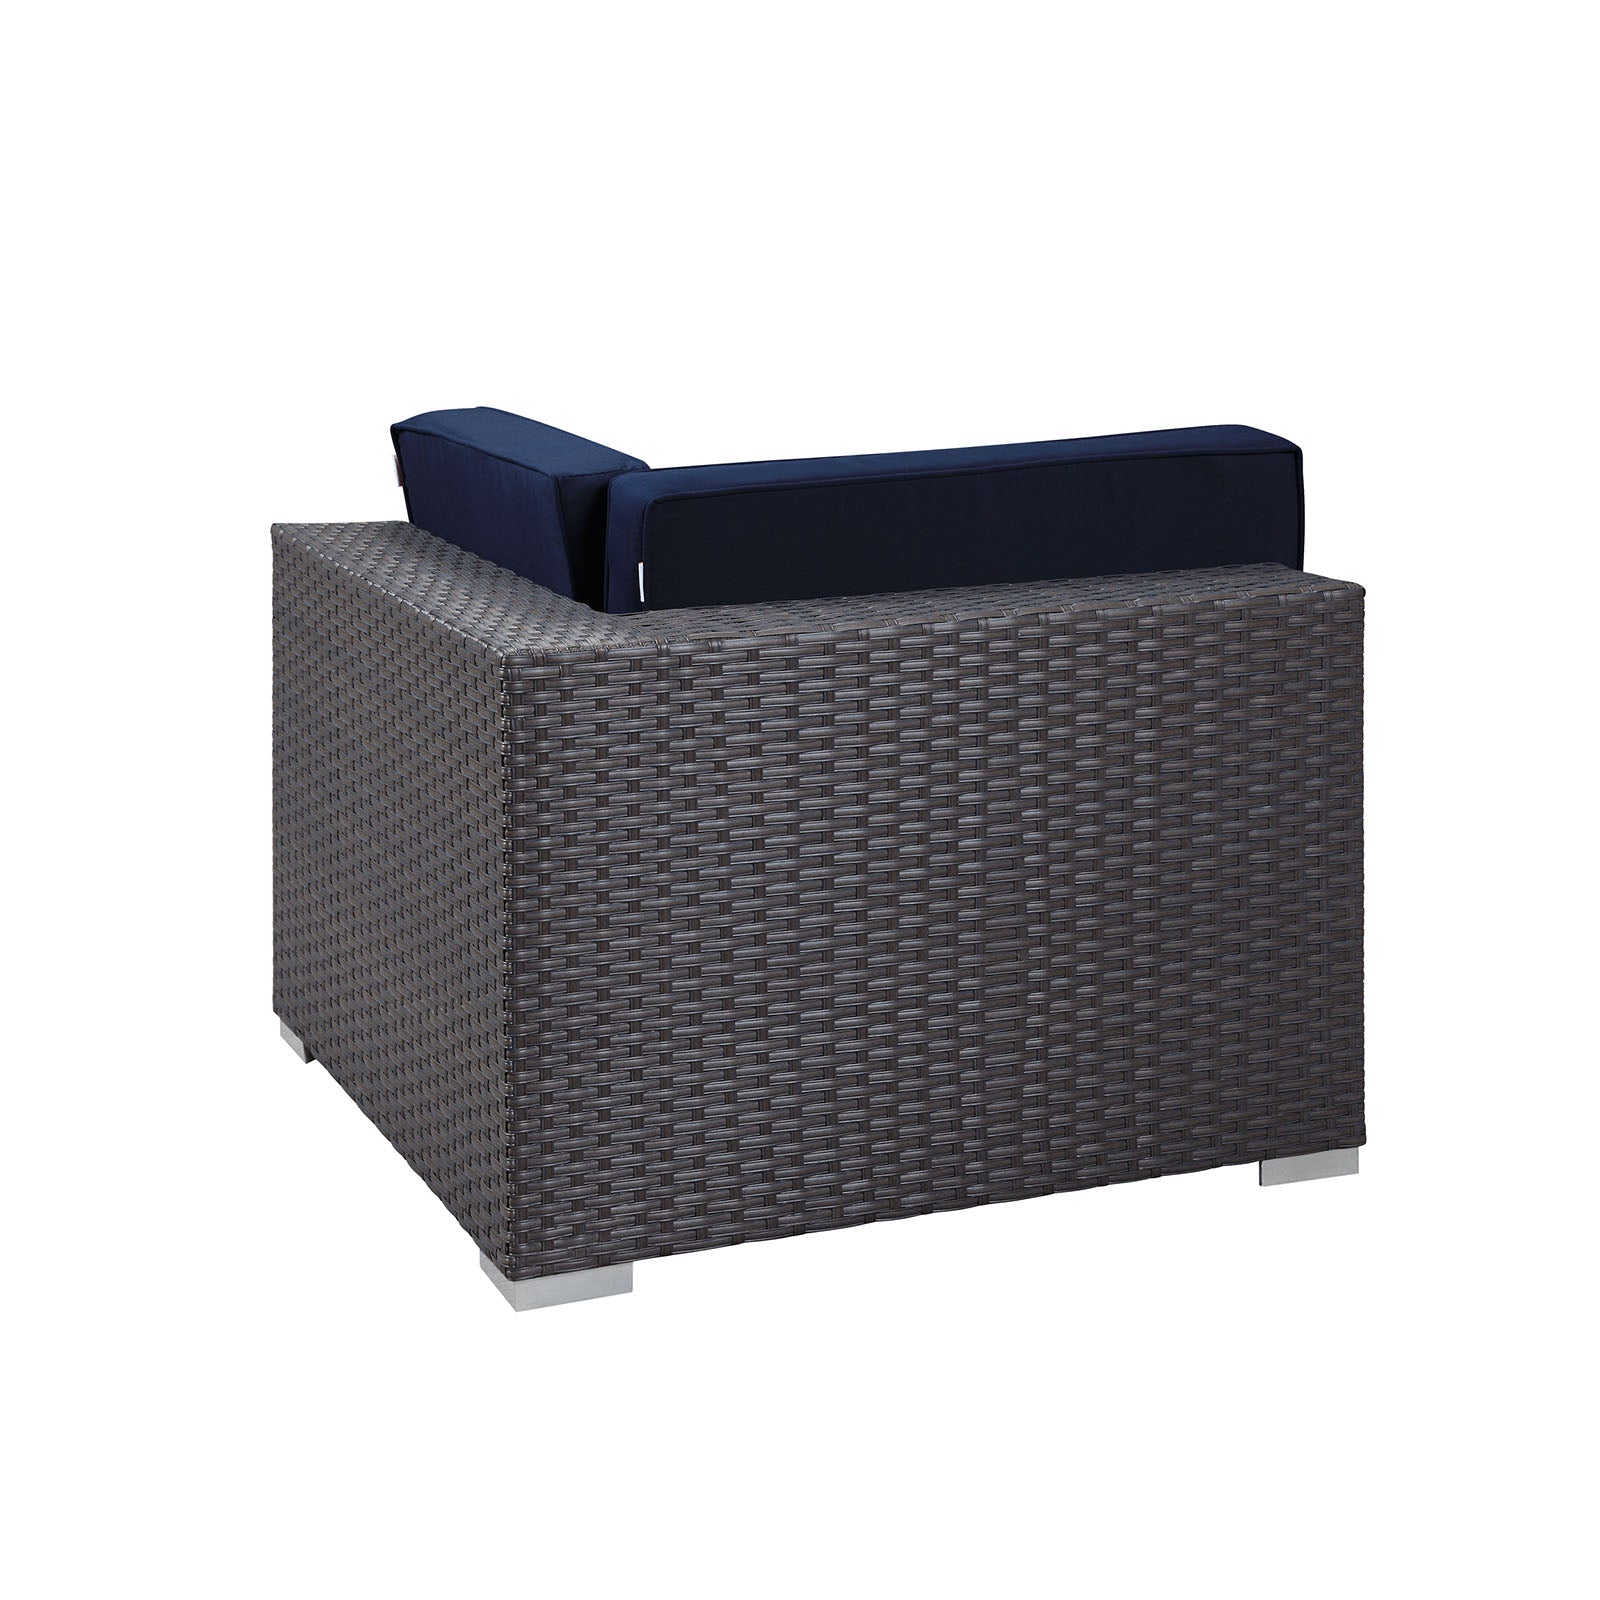 Modway Outdoor Chairs - Sojourn Outdoor Corner Sofa Canvas Navy